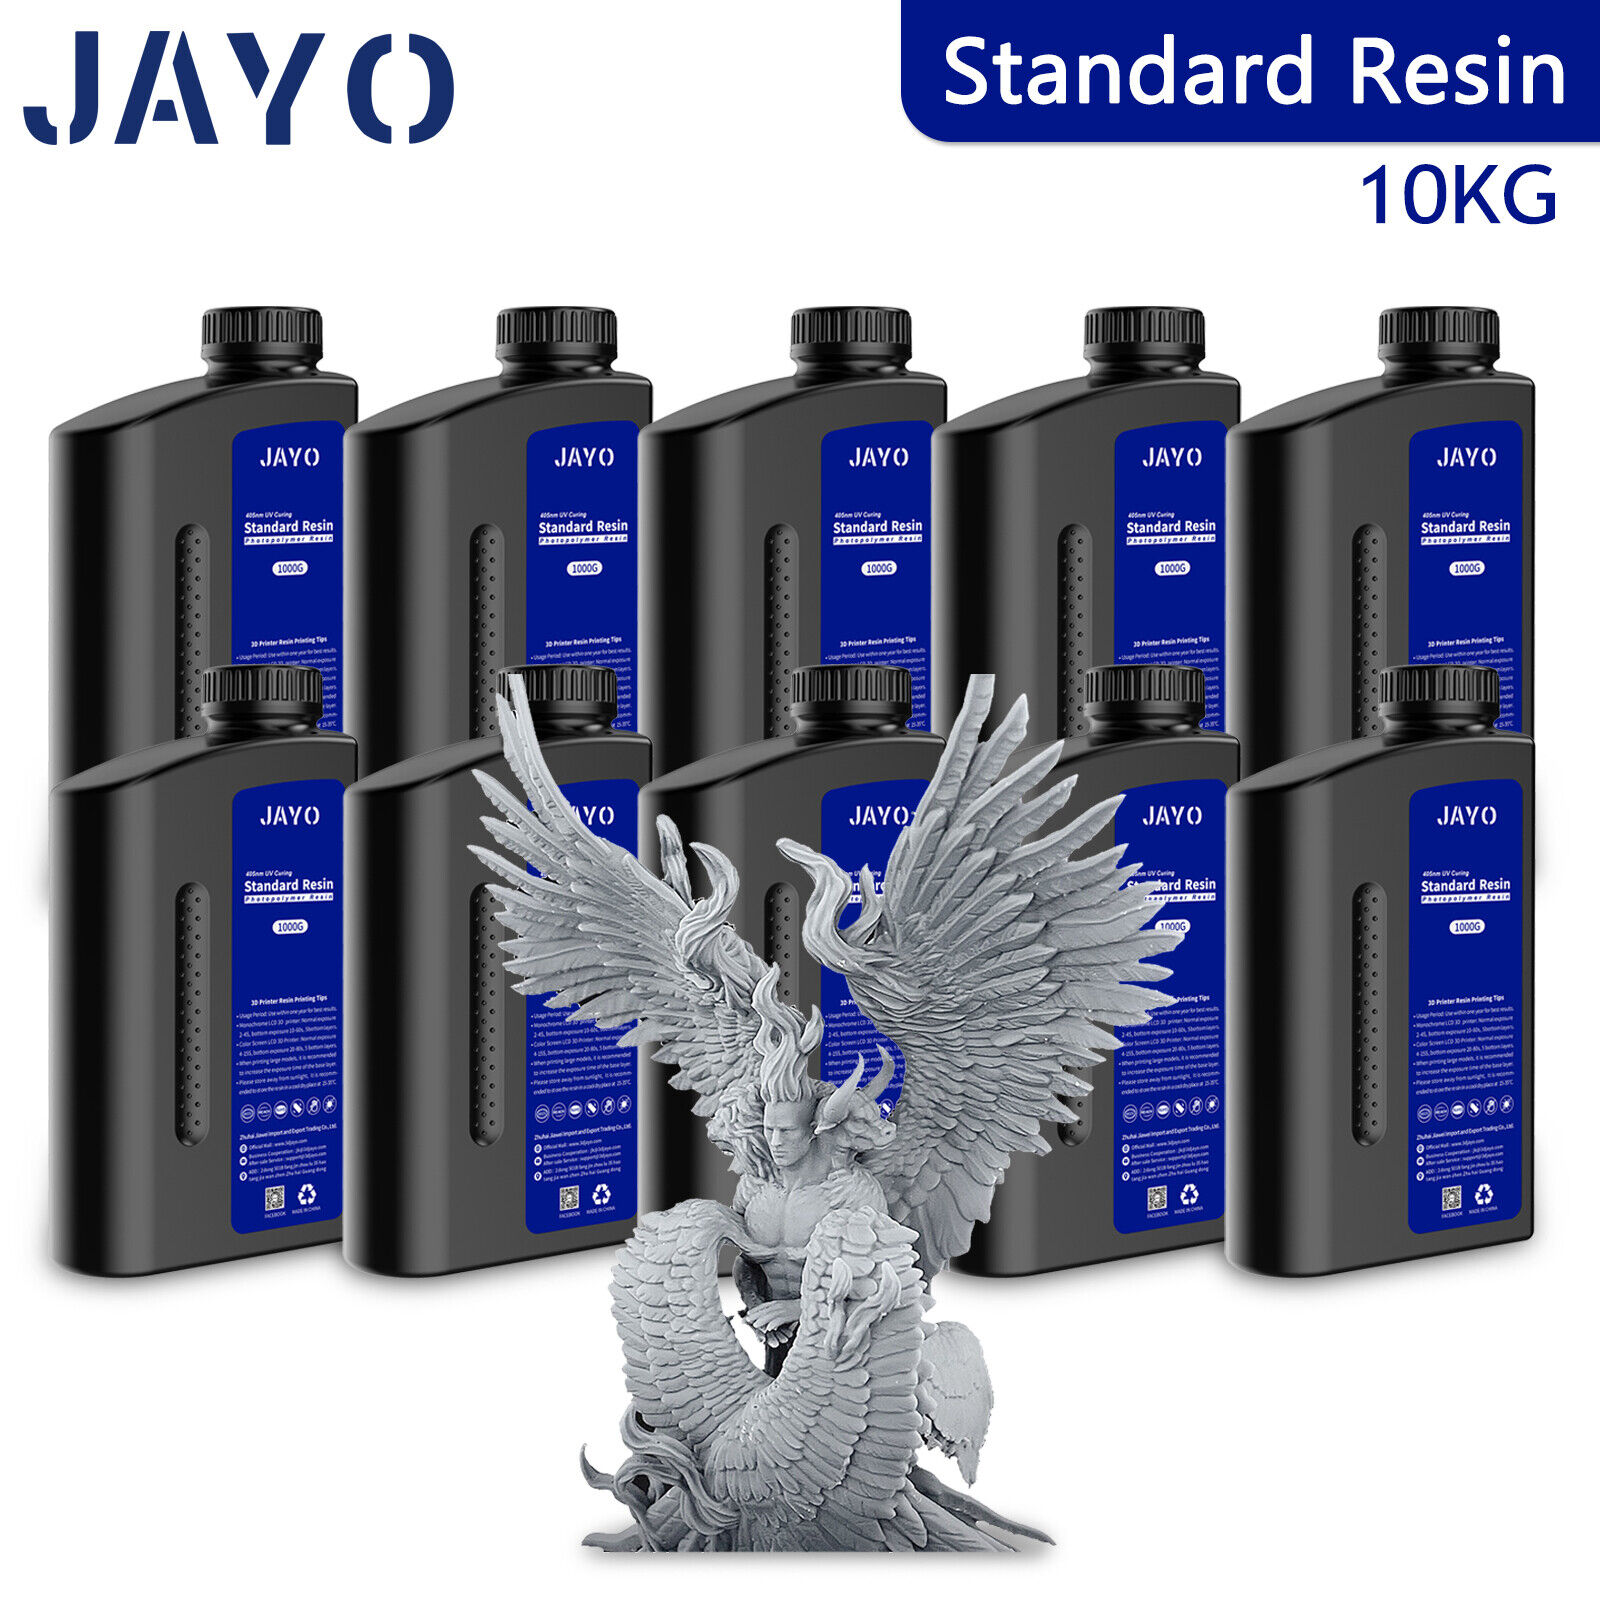 JAYO 10KG 405nm Standard/ABS-Like/Water Washable/Plant-Based Resin 3D Printer